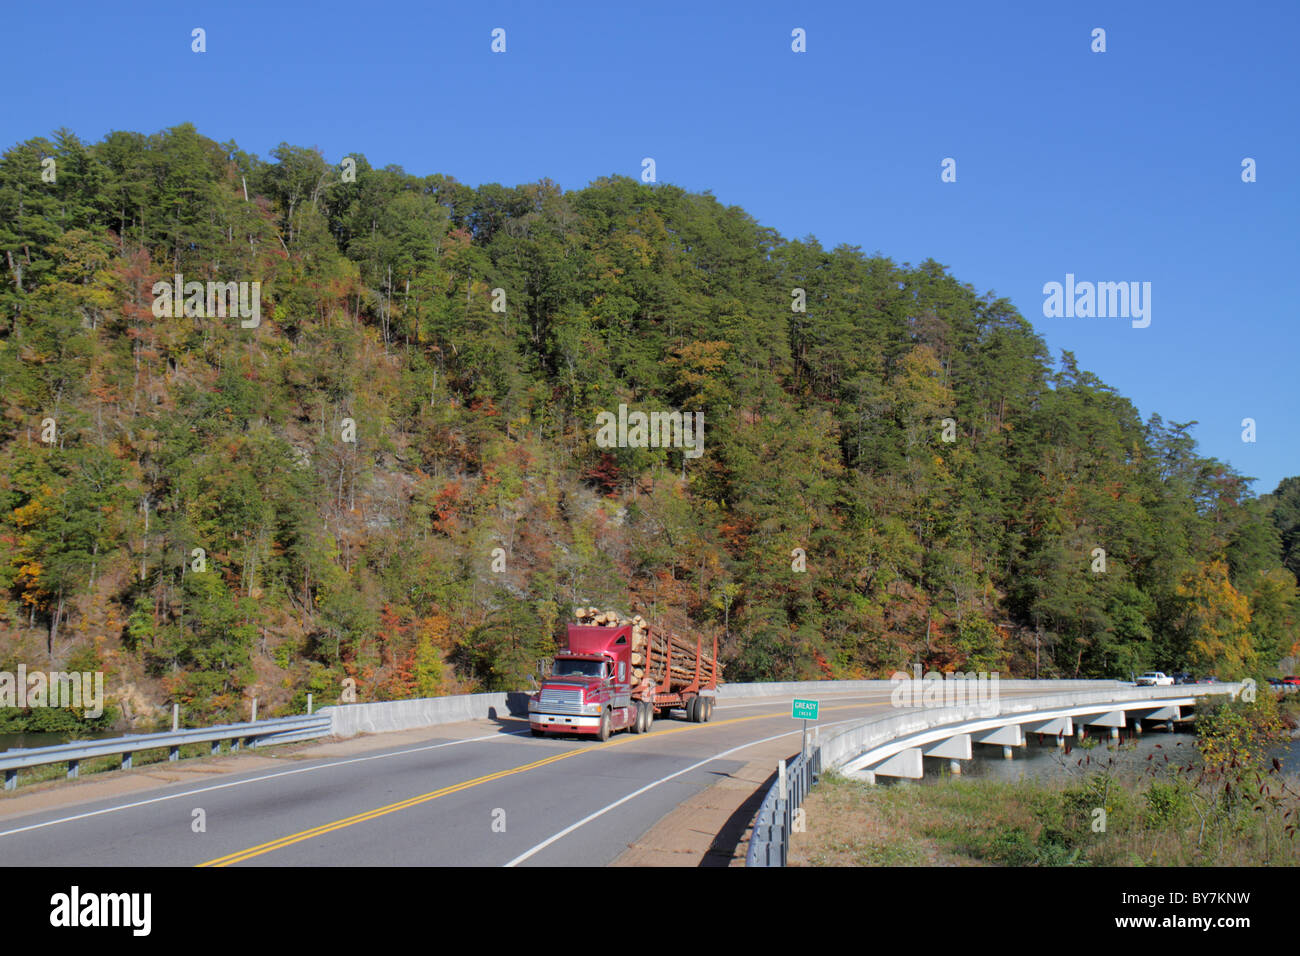 Tennessee Cherokee National Forest,Greasy Creek,Department of Agriculture,federal land,trees,managed resource,timber harvesting,bridge,roadway,logging Stock Photo